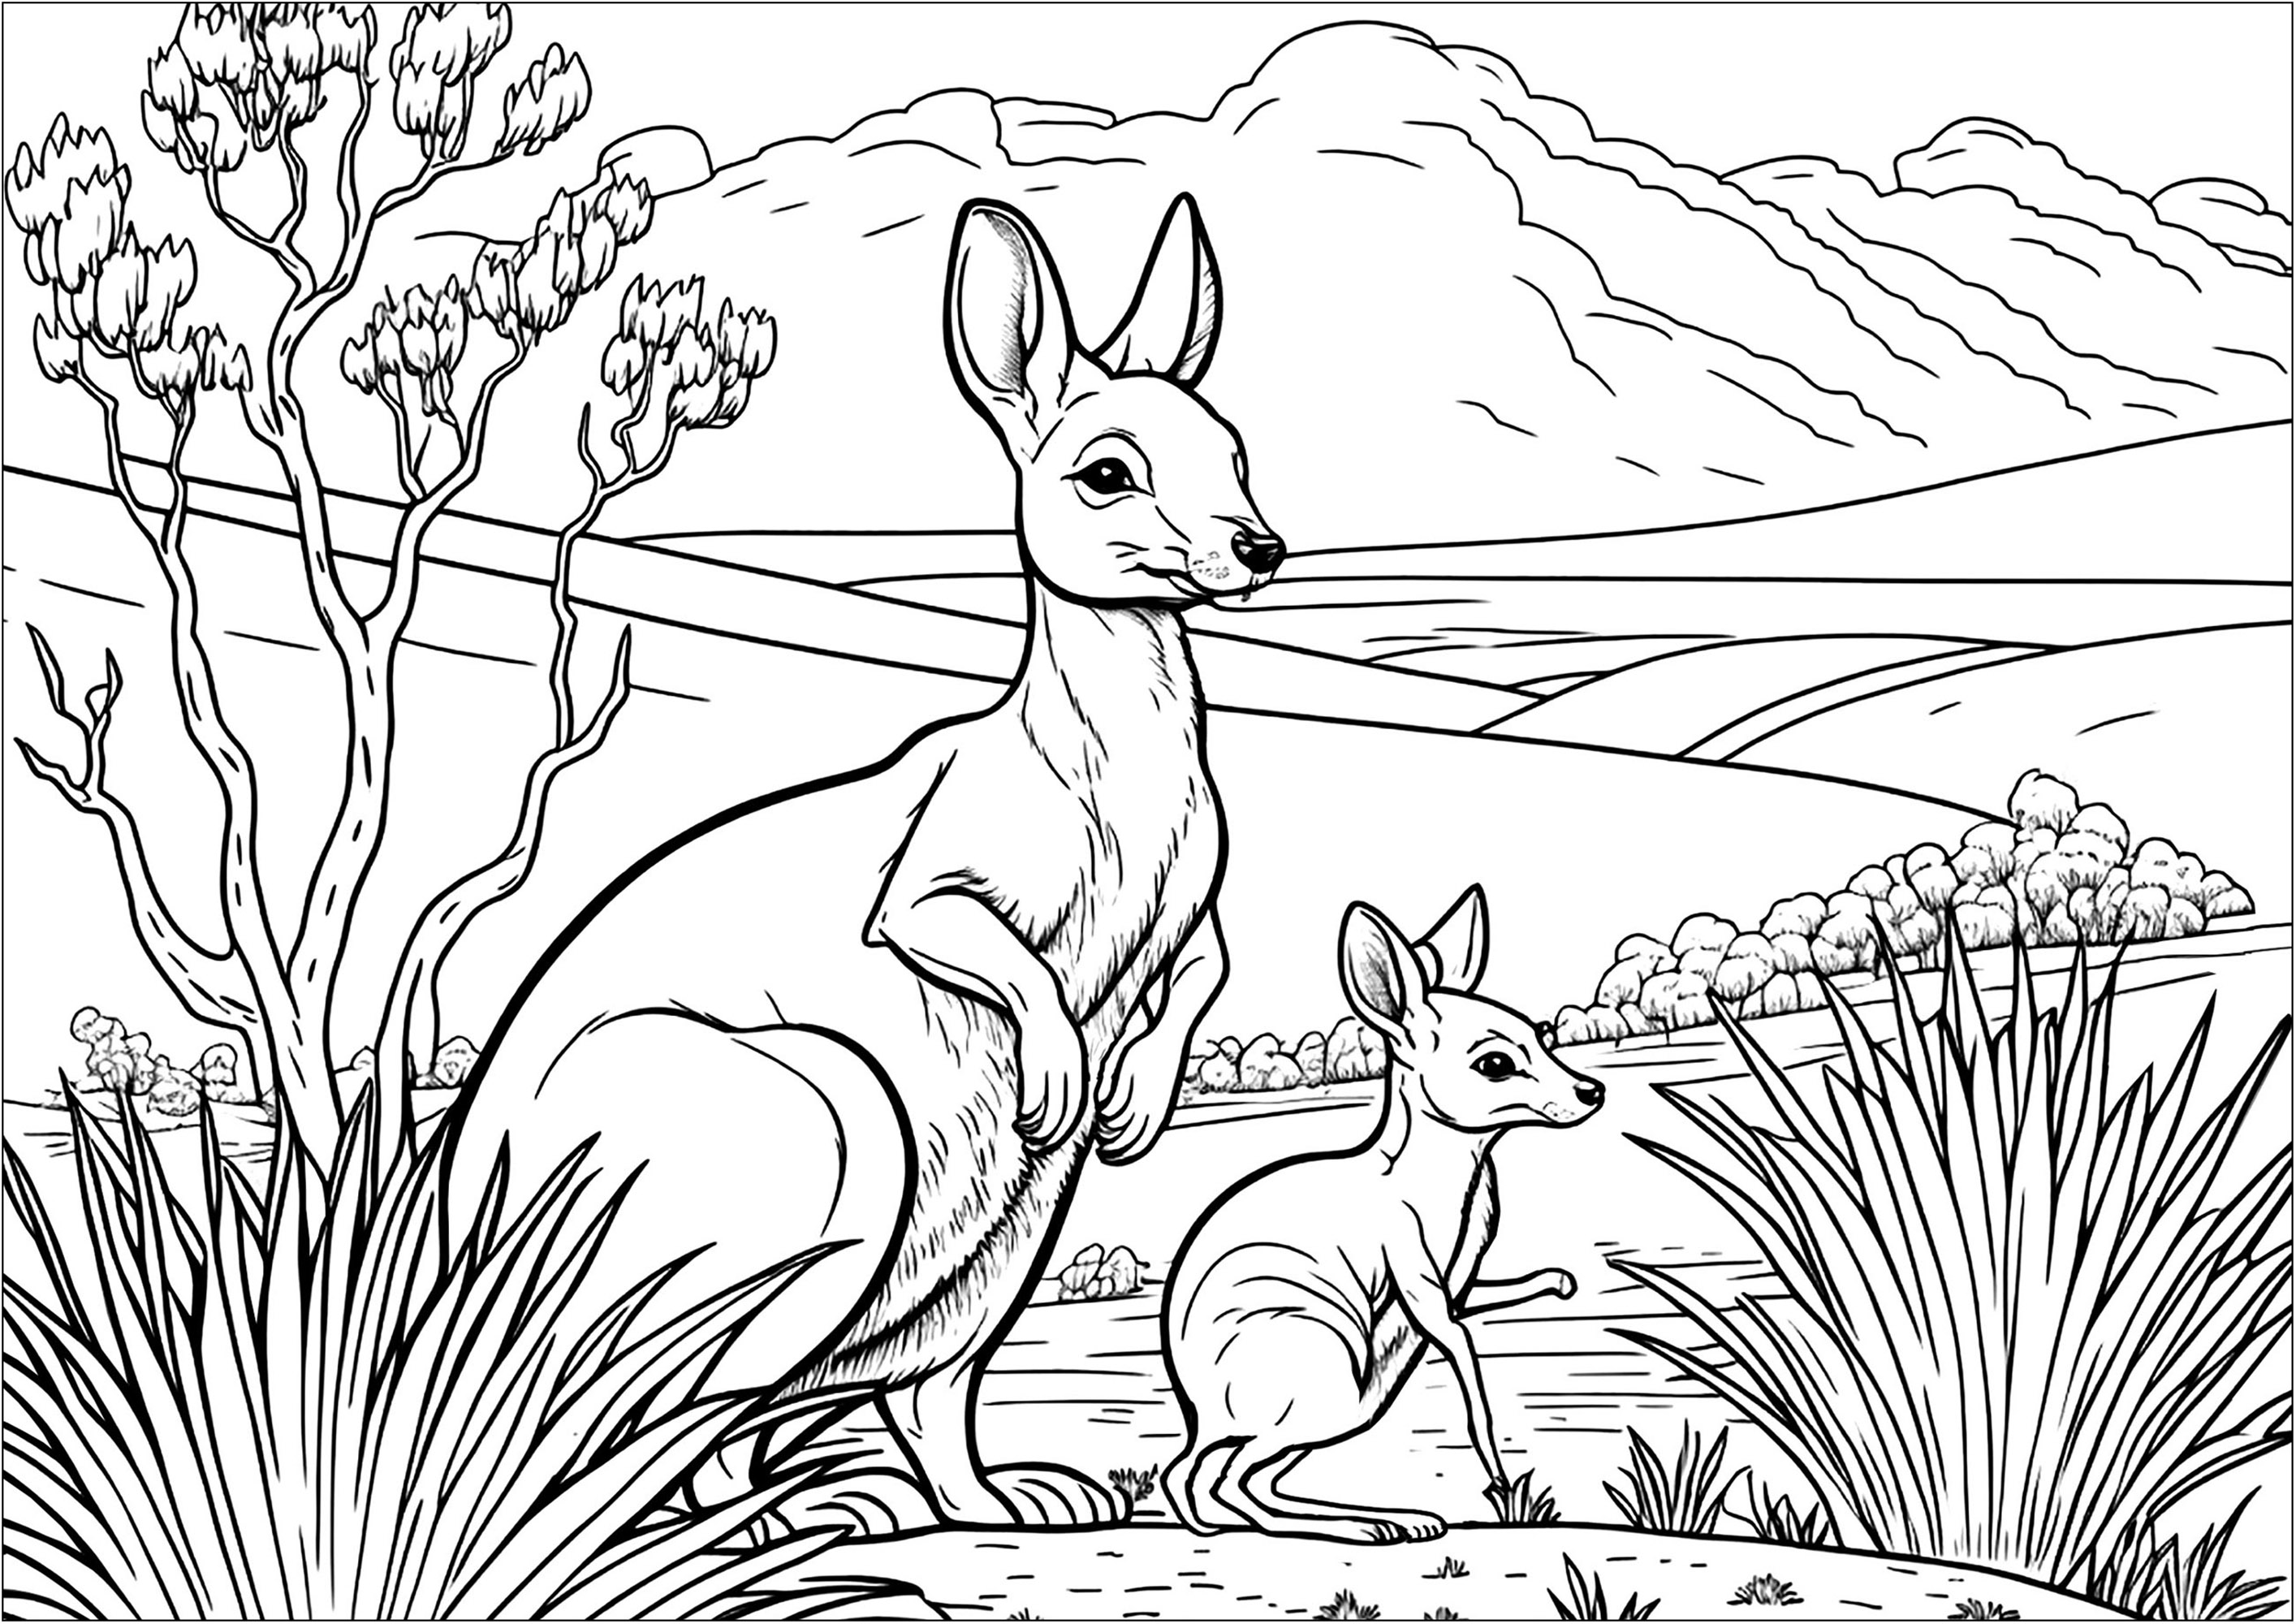 A rather complex coloring page with a mother kangaroo and her little one. Also color in the beautiful landscape and vegetation that is an integral part of this wonderful coloring design.